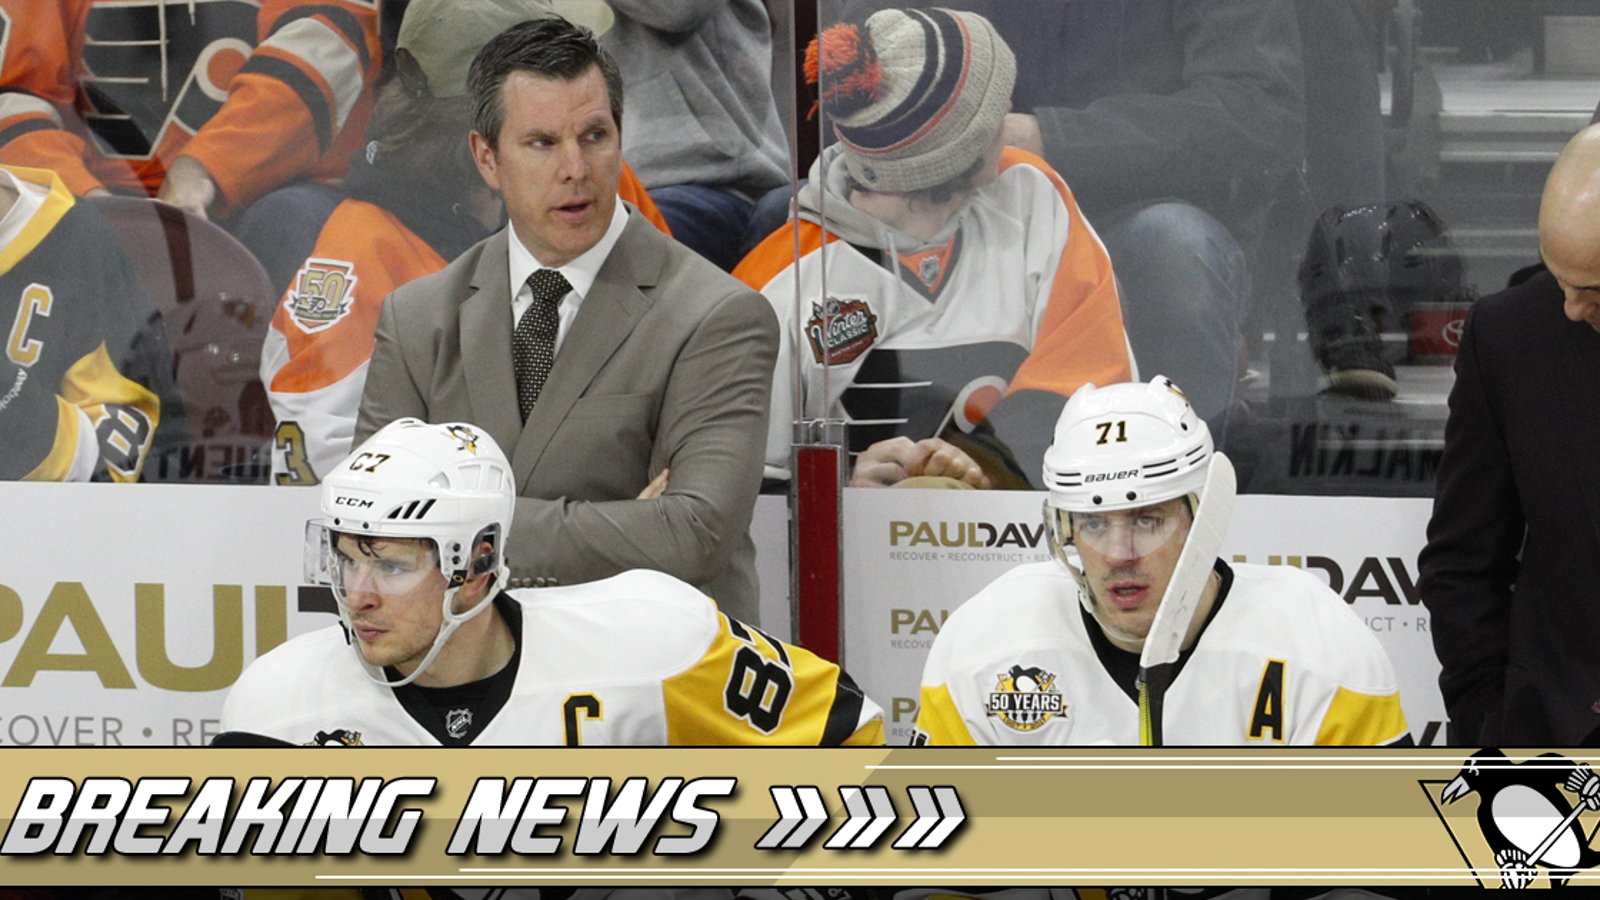 BREAKING: Penguins Head Coach Mike Sullivan gives IMPORTANT update on Sidney Crosby